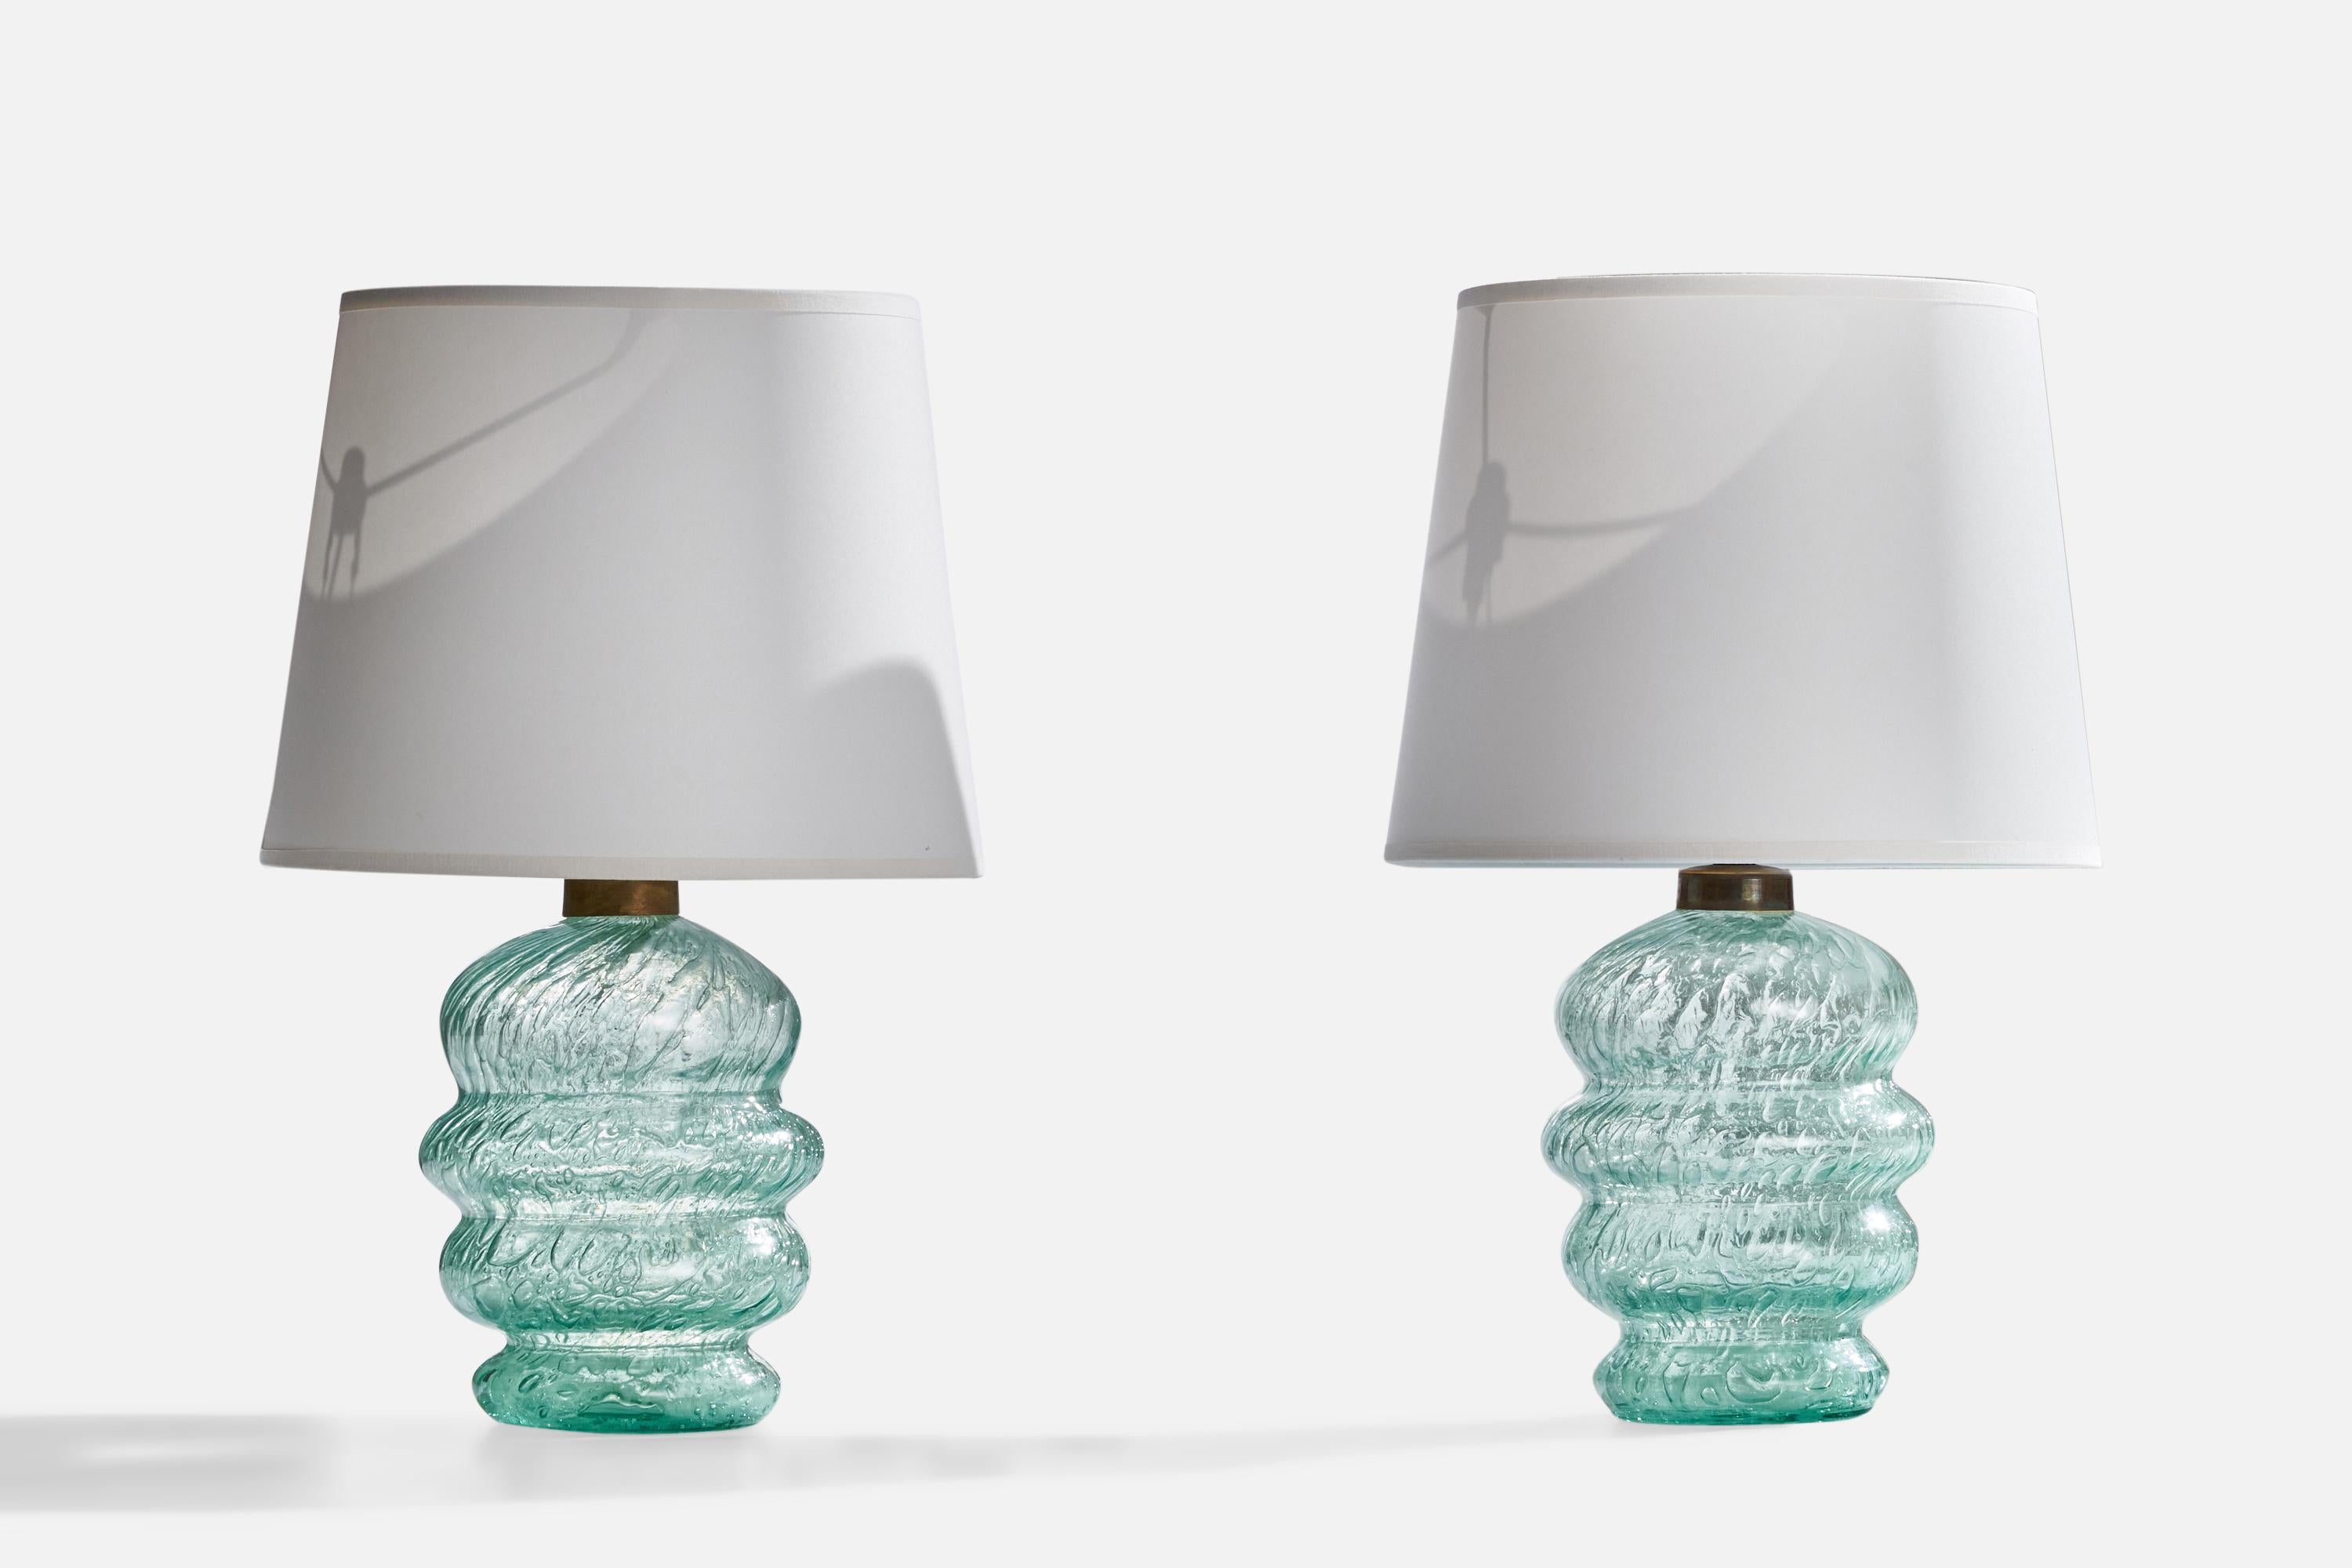 A pair of blown glass and brass table lamps designed by Ture Berglund and produced by Stockholms Glasbruk, Sweden, c. 1940s.

Dimensions of Lamp (inches): 10”  H x 5.5”  Diameter
Dimensions of Shade (inches): 8” Top Diameter x 10”  Bottom Diameter x